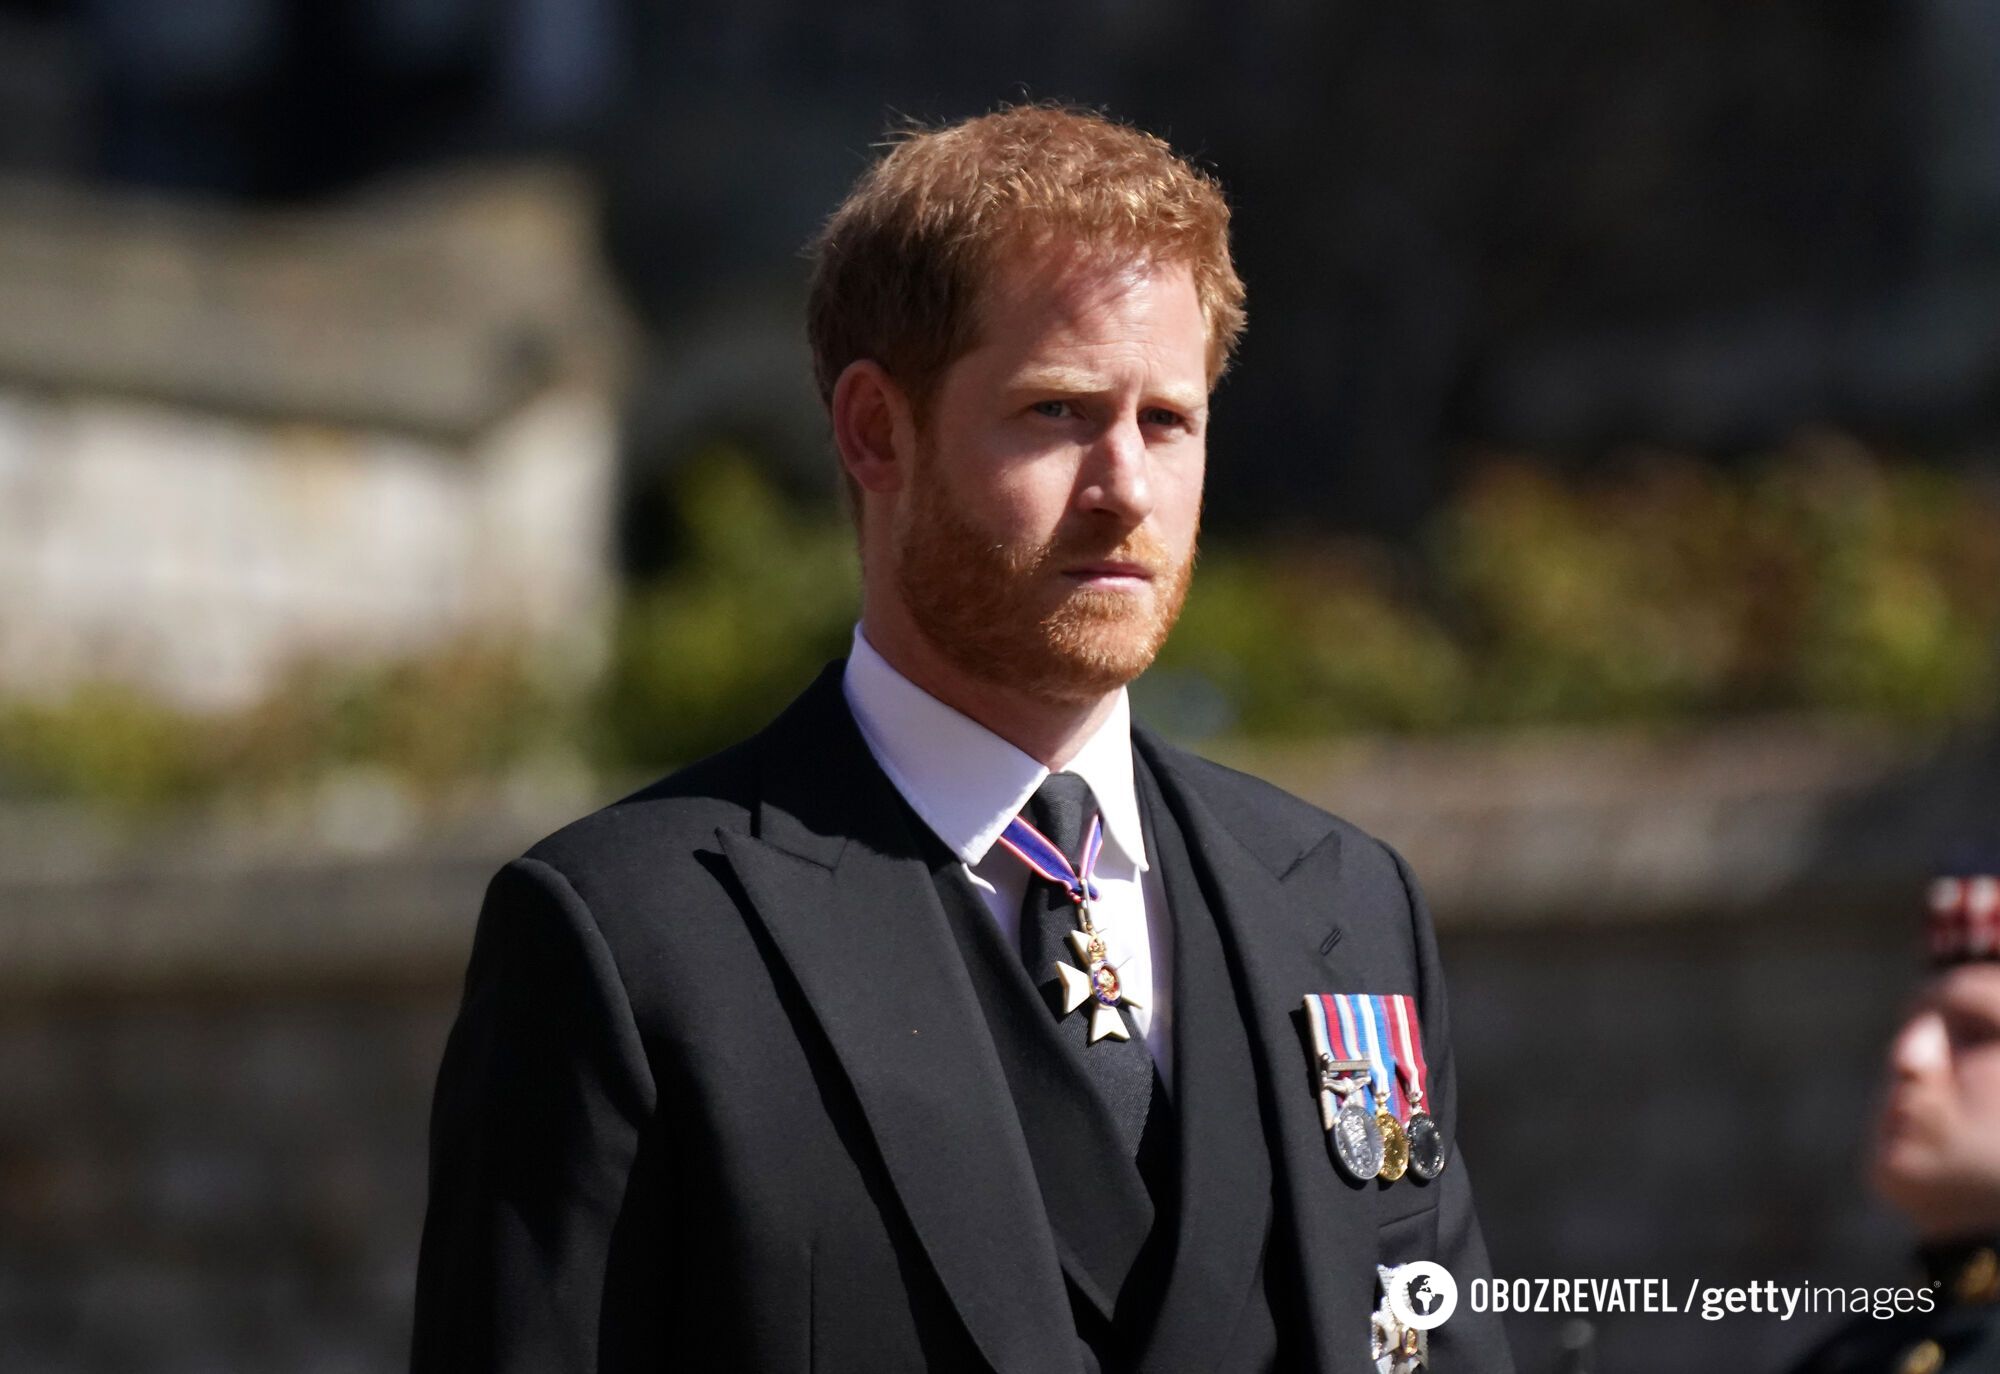 Who is next in line to the throne? What does the British line of succession look like and is Prince Harry in it?